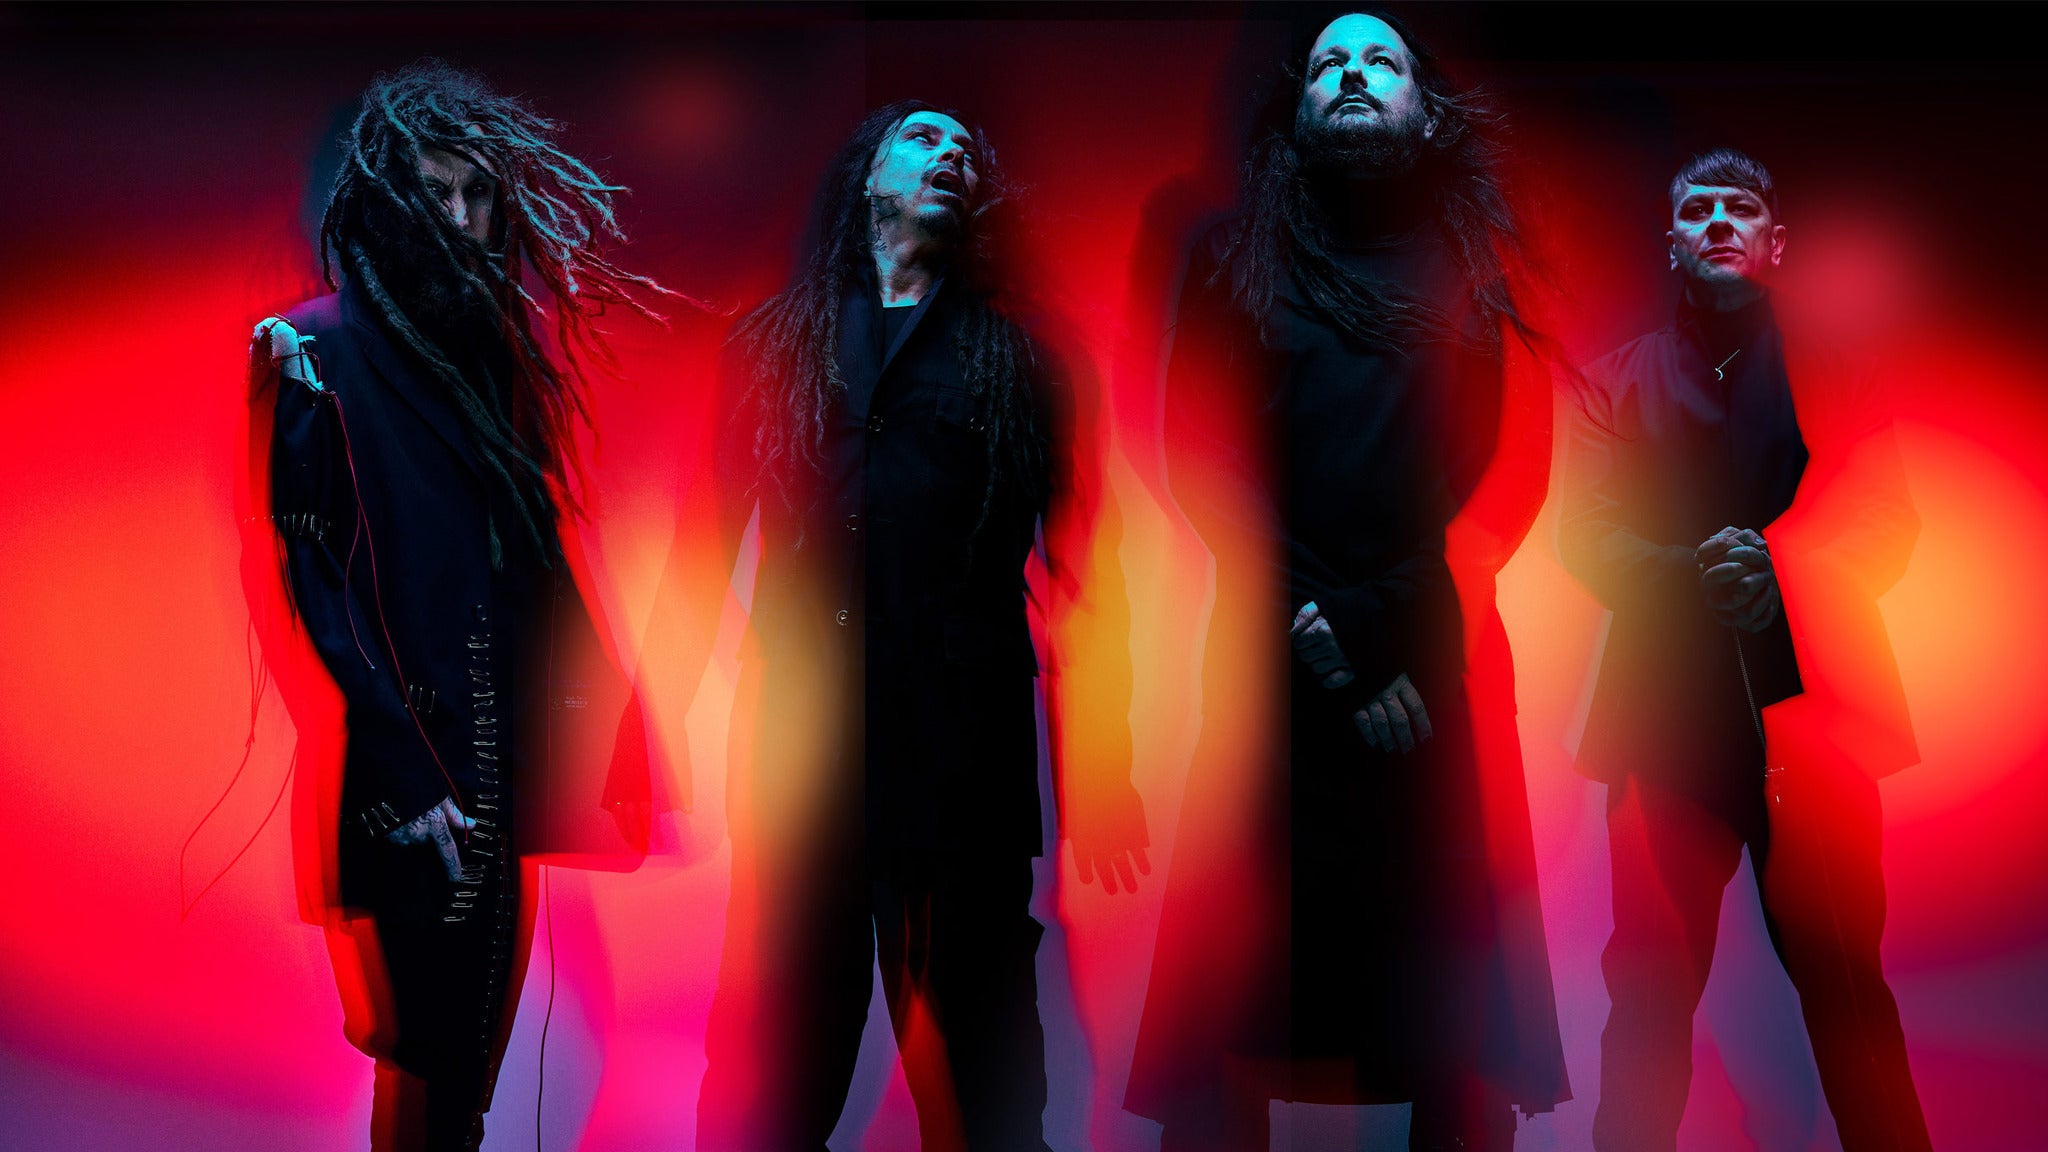 KoRn x Evanescence - 2022 Summer Tour in West Valley City promo photo for Live Nation presale offer code